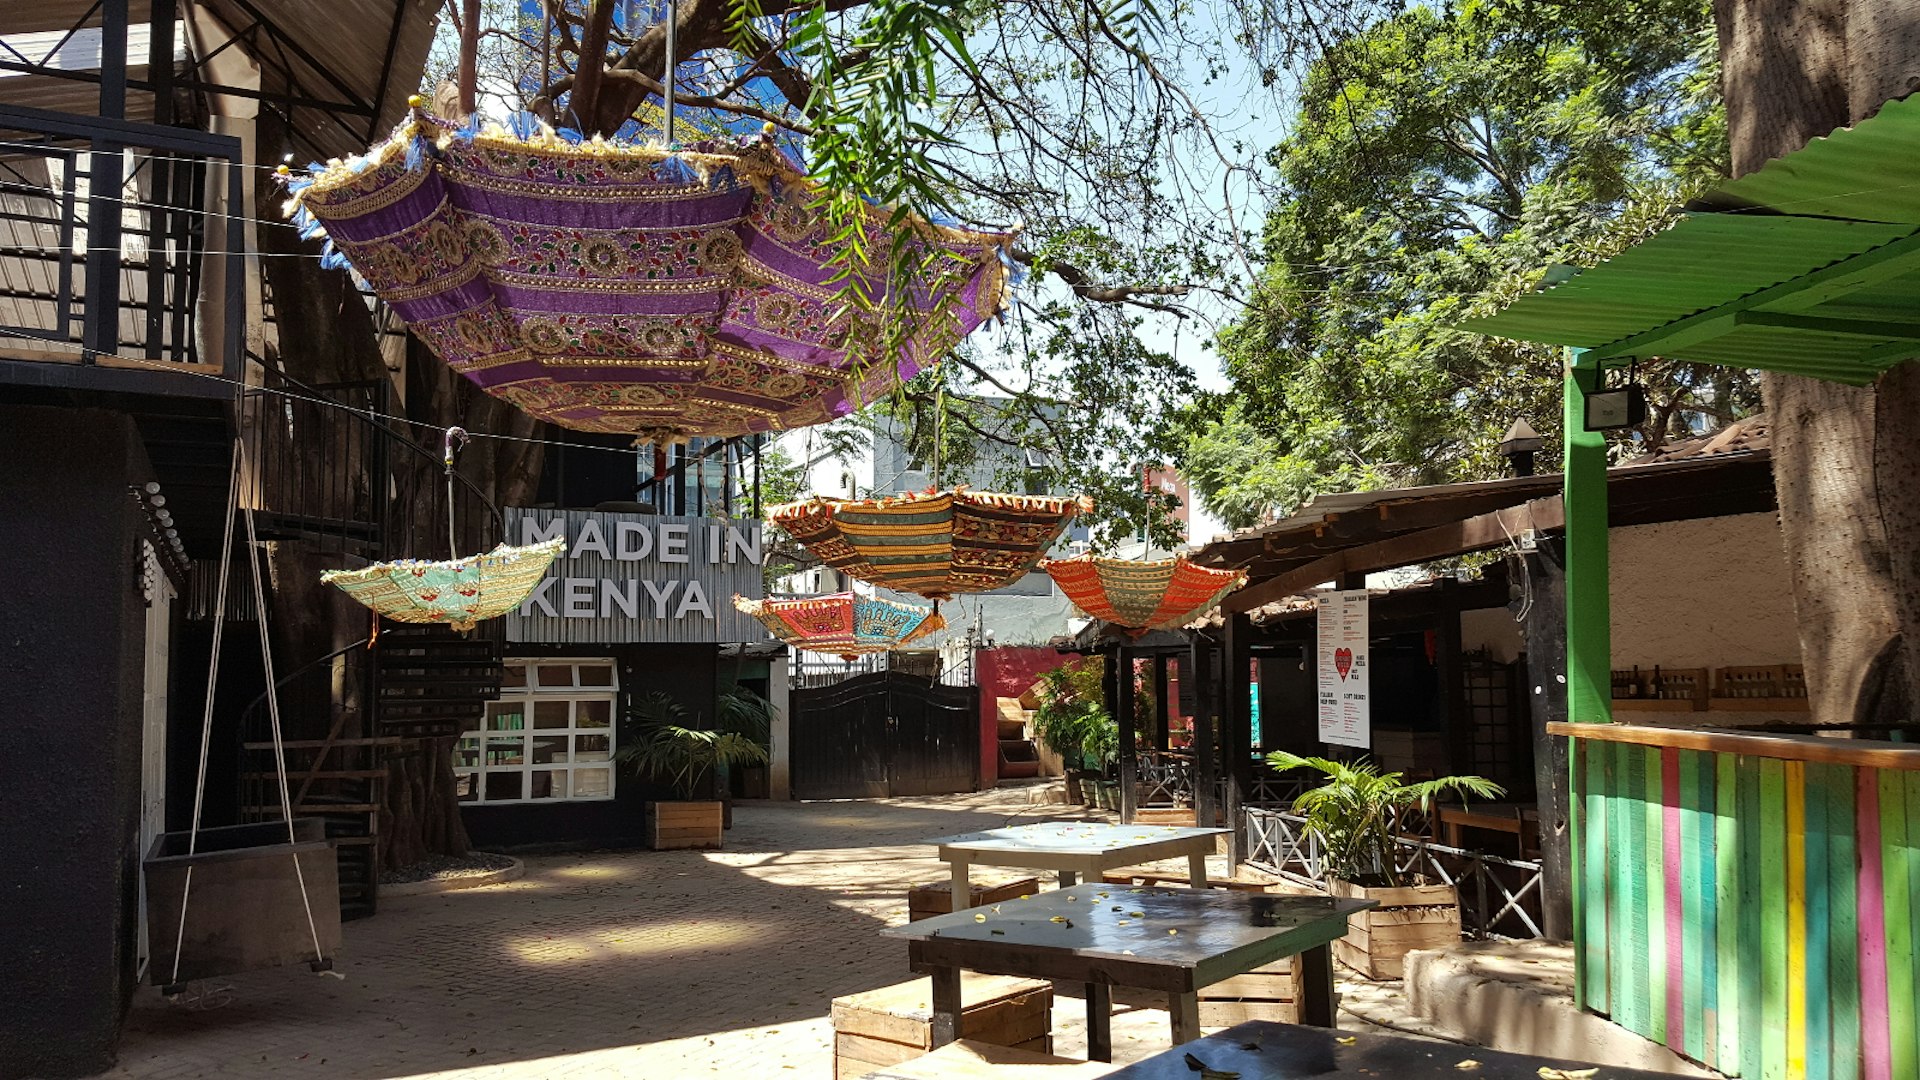 Trees and inverted, colourful Indian umbrellas hanging from branches, shade the outdoor area at the Alchemist bar, which hosts the Made in Kenya shop An open-air sho© Clementine Logan / Lonely Planet